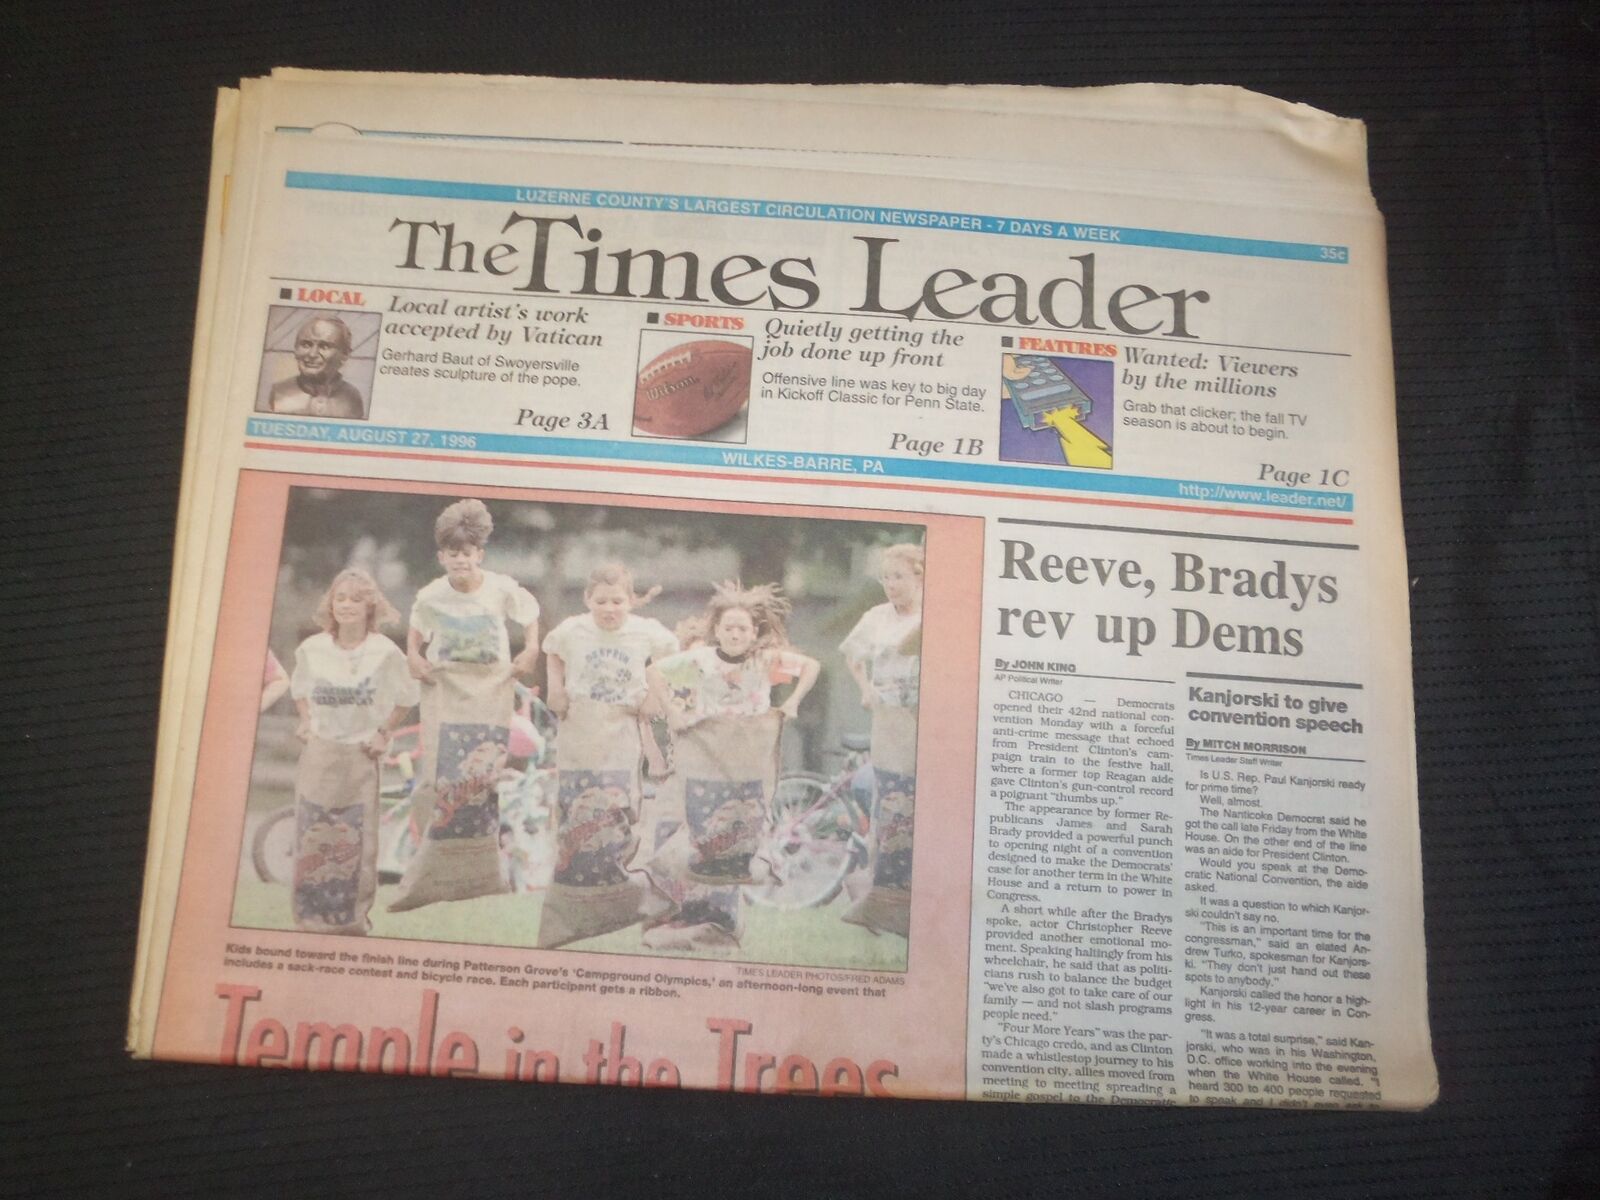 1996 AUGUST 27 WILKES-BARRE TIMES LEADER - REEVE, BRADYS REV UP DEMS - NP 7603